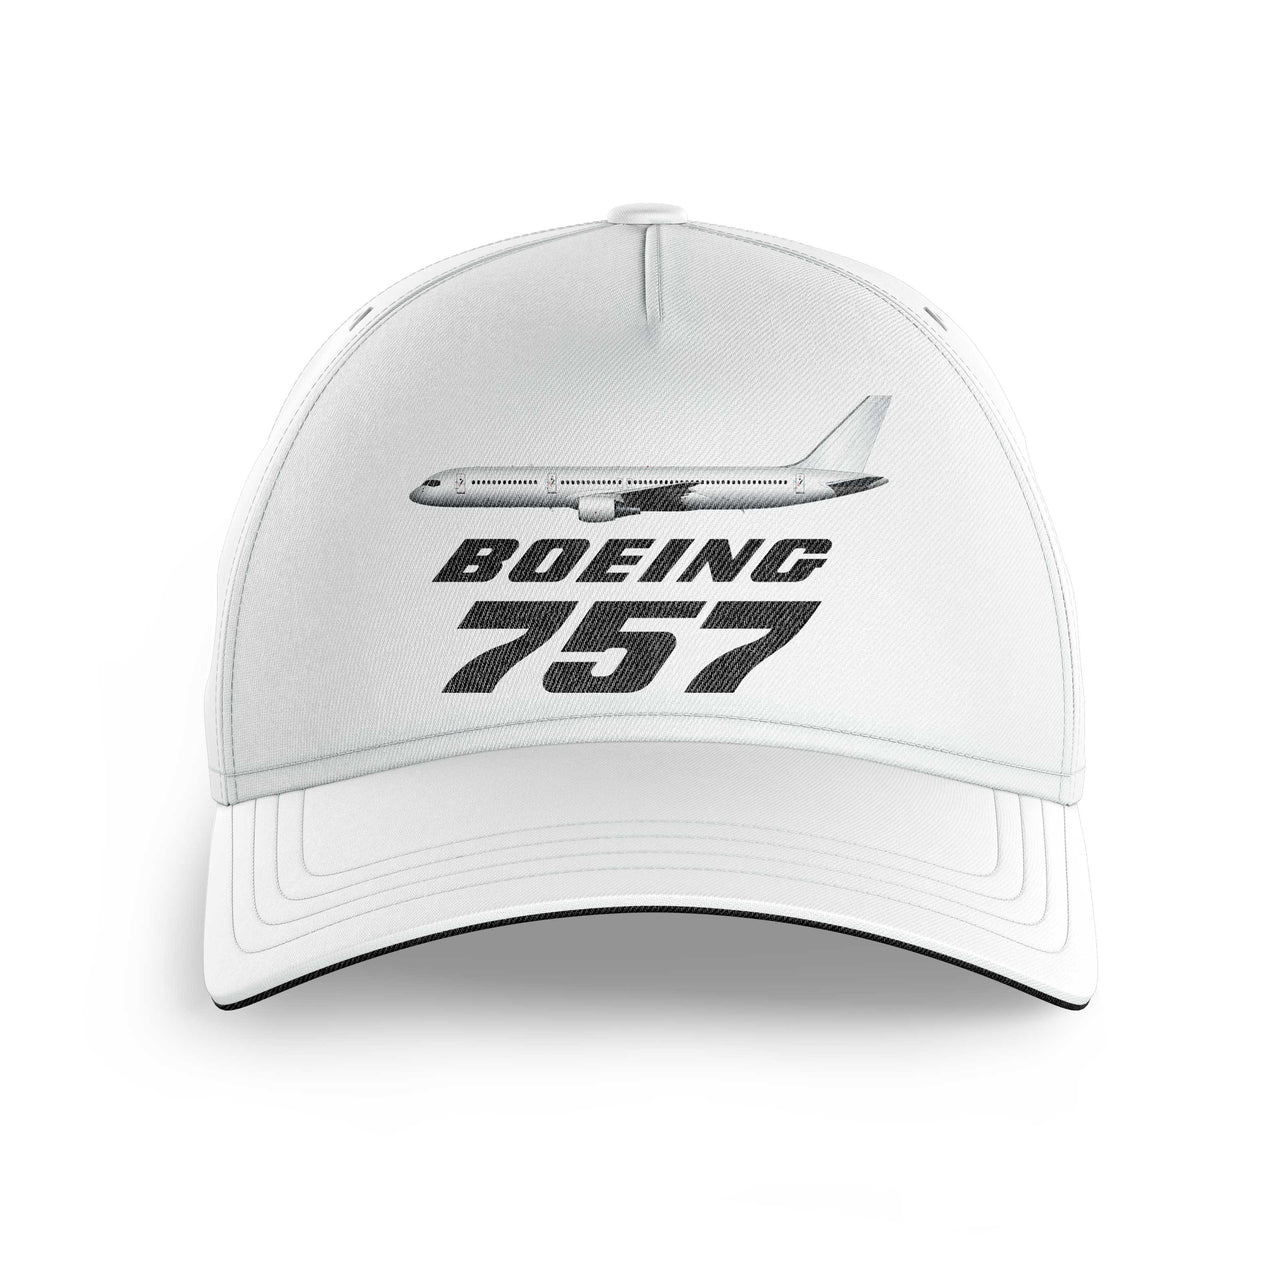 The Boeing 757 Printed Hats